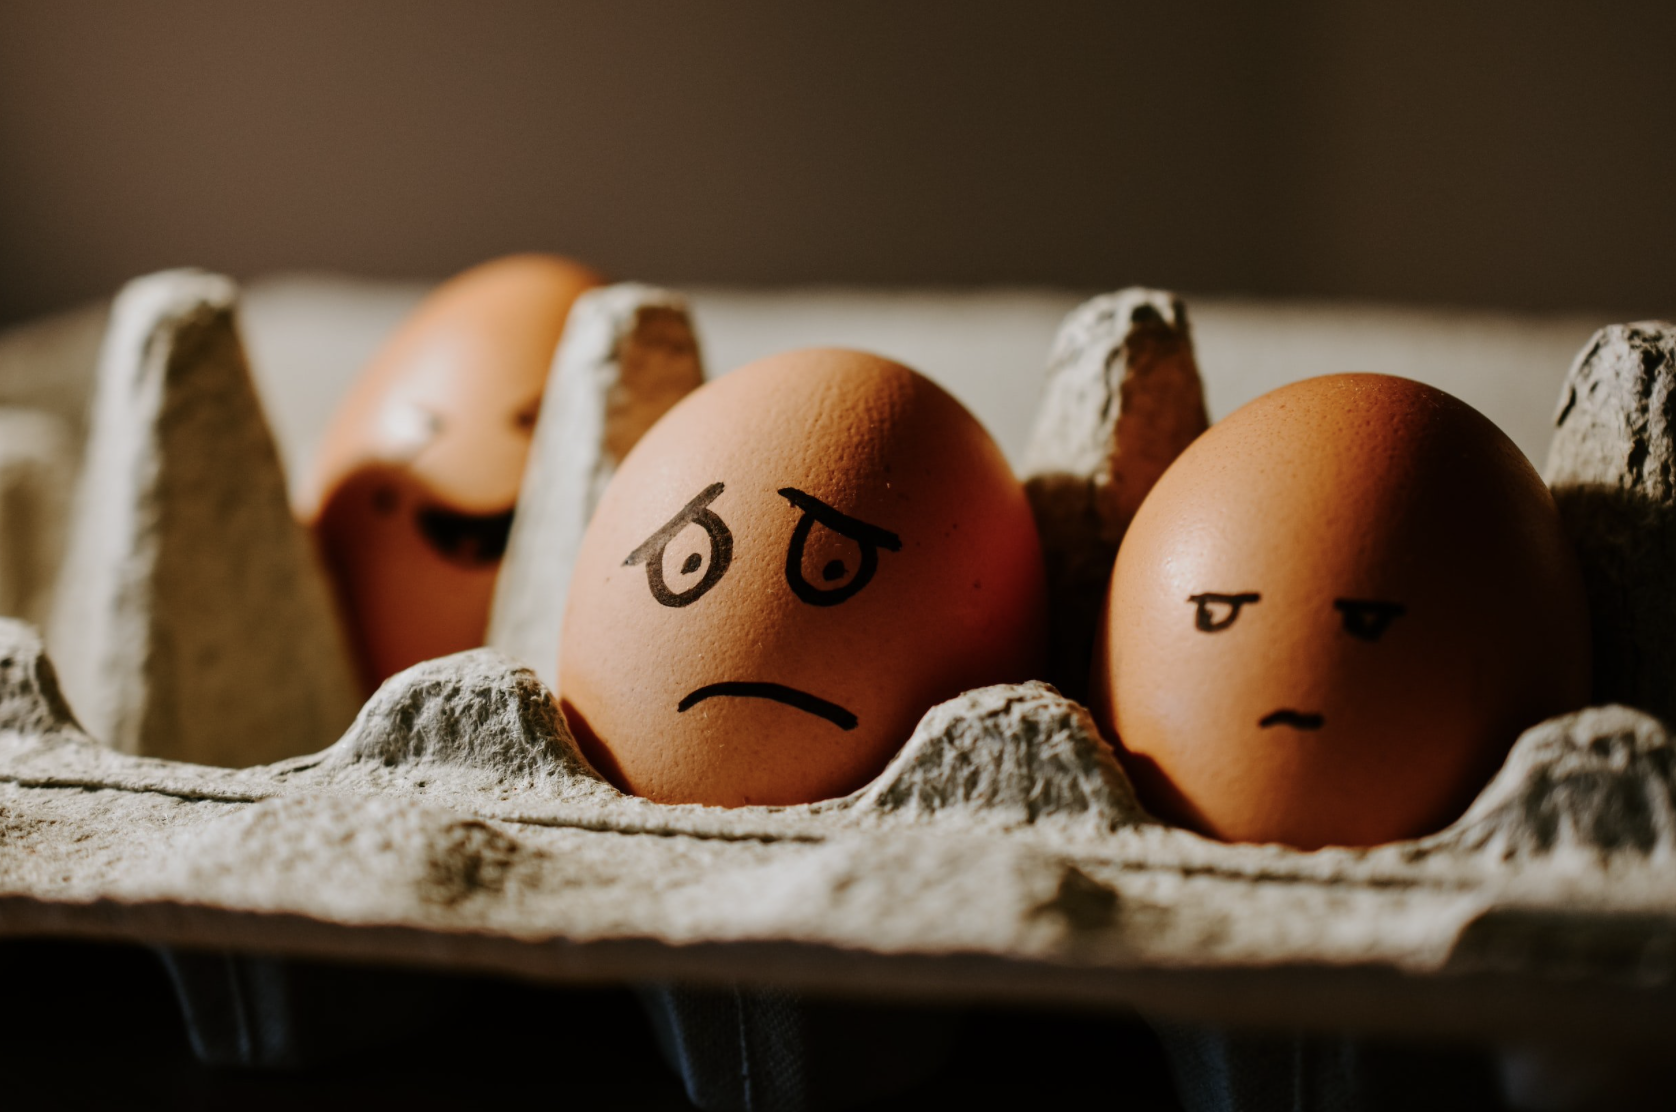 An egg with a sad face drawn on it. With anxiety counseling in NYC, NY, you can learn how to mange your anxiety. Start today by calling us!